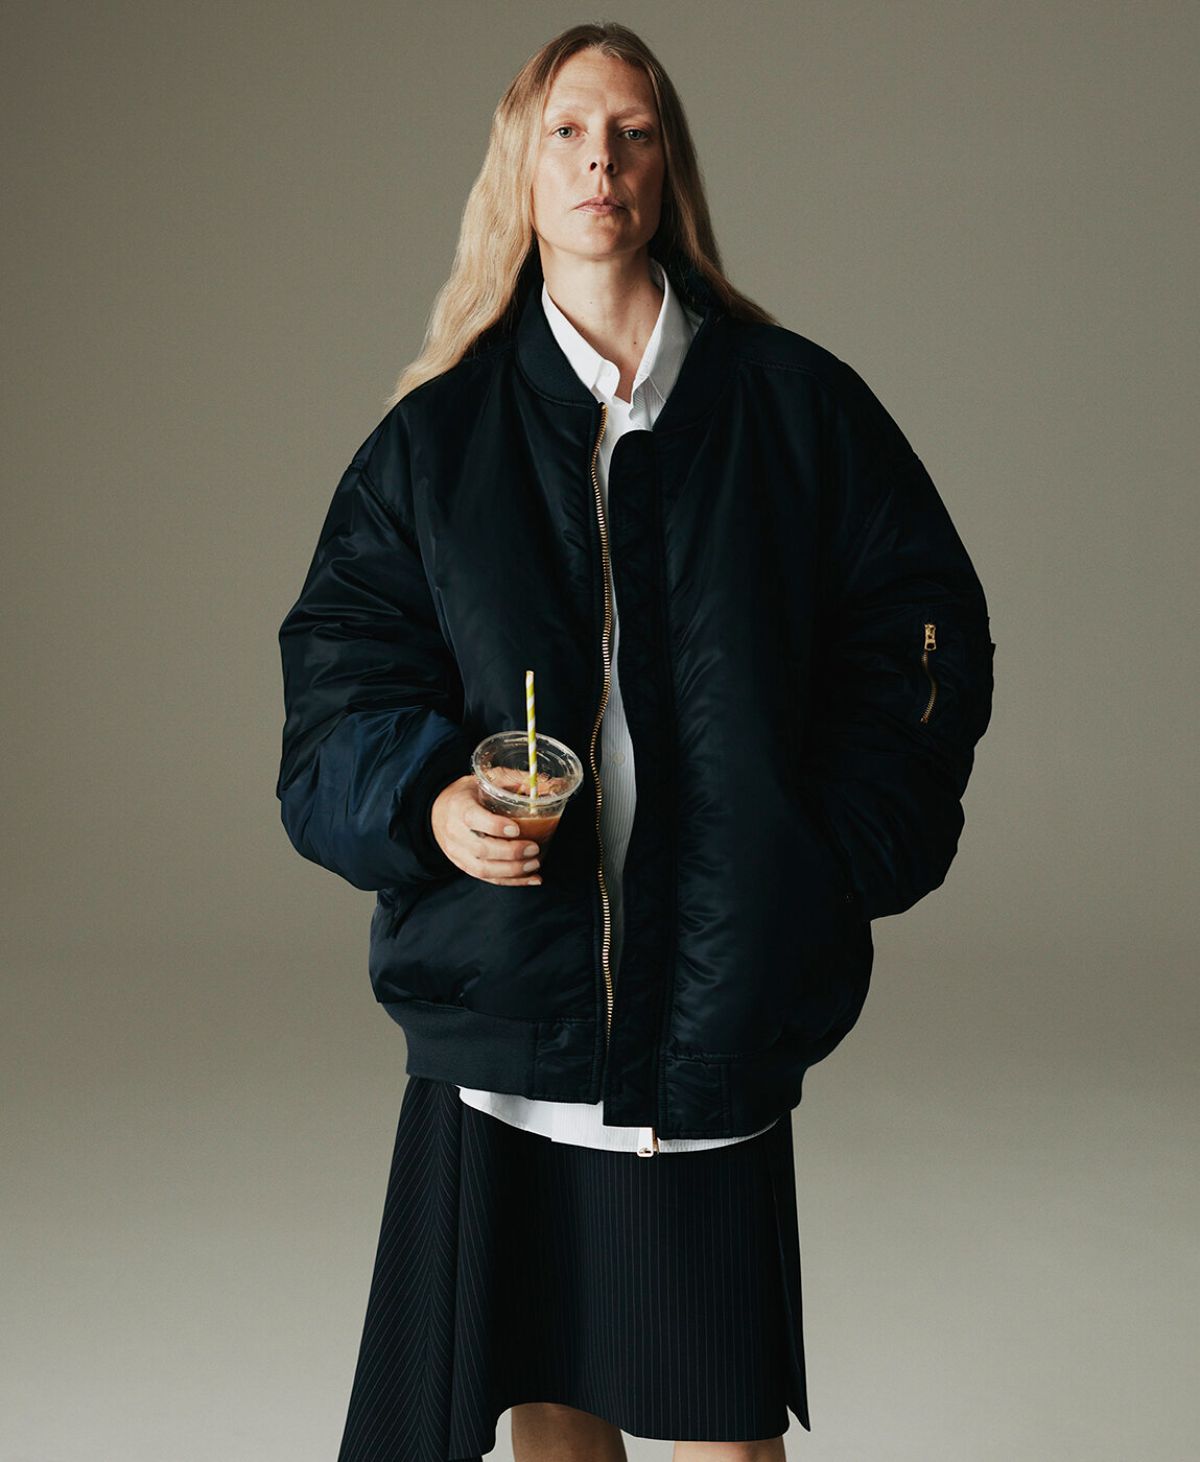 Clothing & Accessories: Vetements Navy Reversible oversized padded bomber jacket / The Frankie Shop White Lui organic cotton-poplin shirt / Vetements Navy Asymmetric pinstripe wool-blend skirt Hybrid Dressing: Laura Morgan by Sarah Piantadosi for Matches Fashion Fall-Winter 2021 Ad Campaign